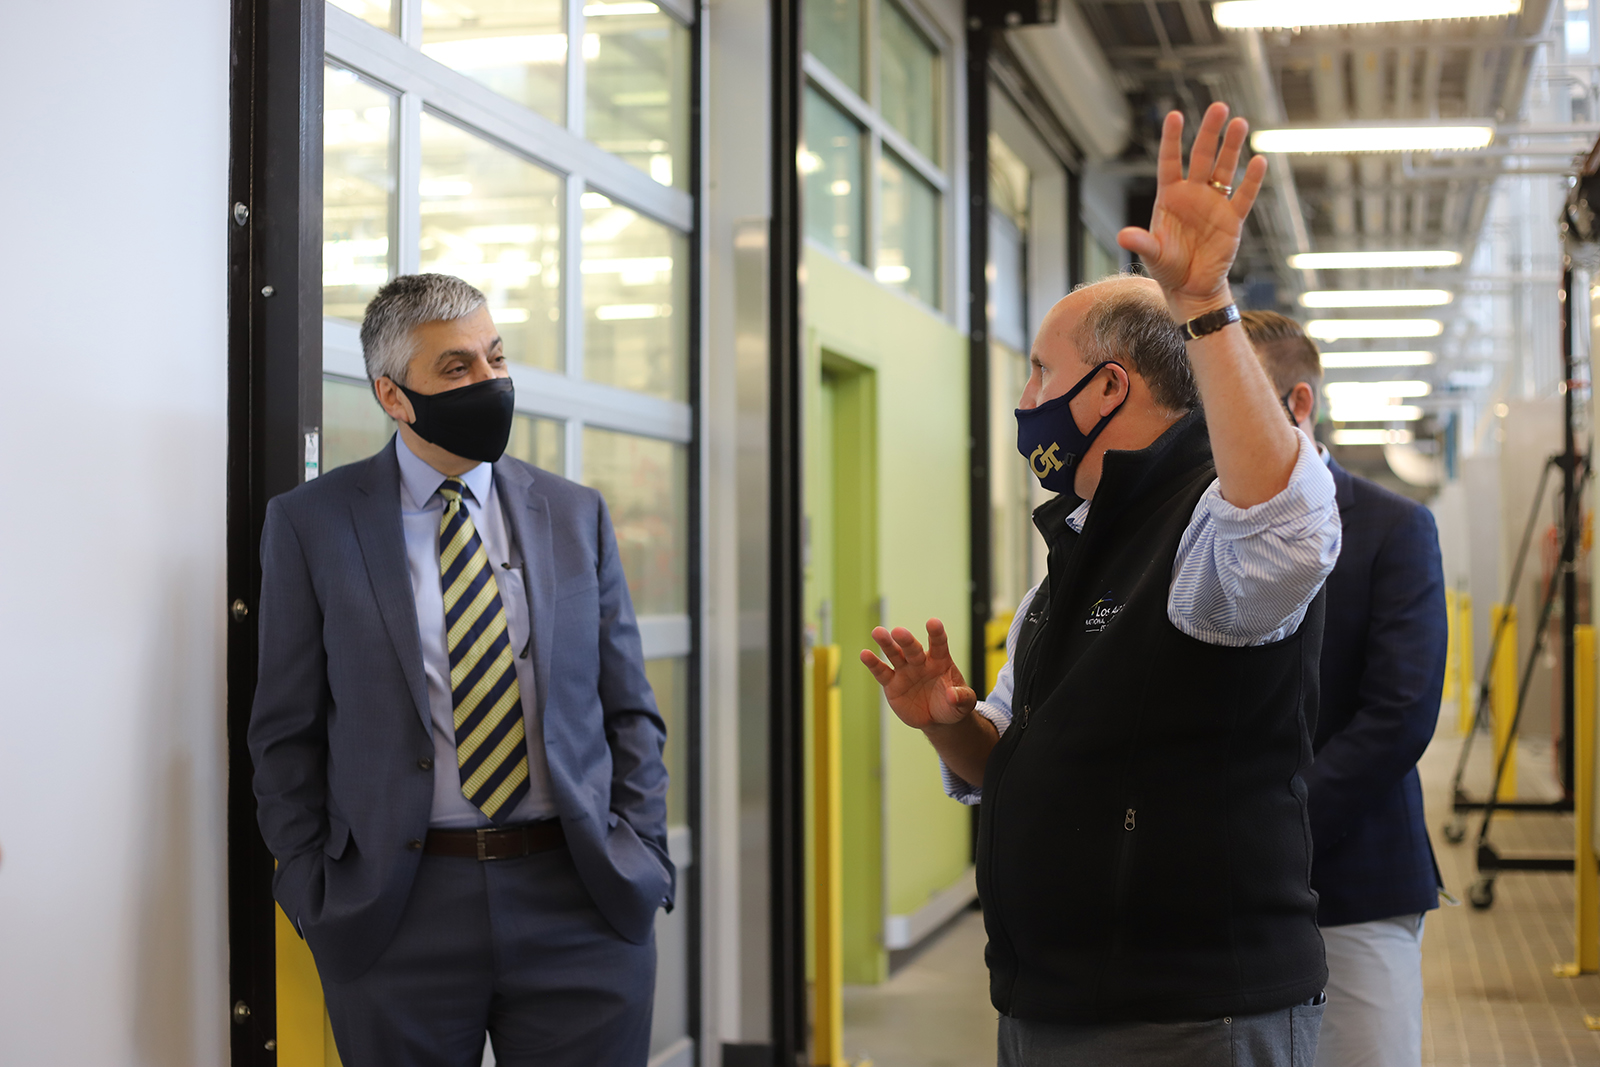 Chaouki Abdallah, executive vice president for Research, and Paul M. Dabbar, undersecretary for science at the U.S. Department of Energy, engage in discussion during a tour of the Carbon Neutral Energy Solutions Laboratory on Sept. 25, 2020. Photo by Ashley Ritchie